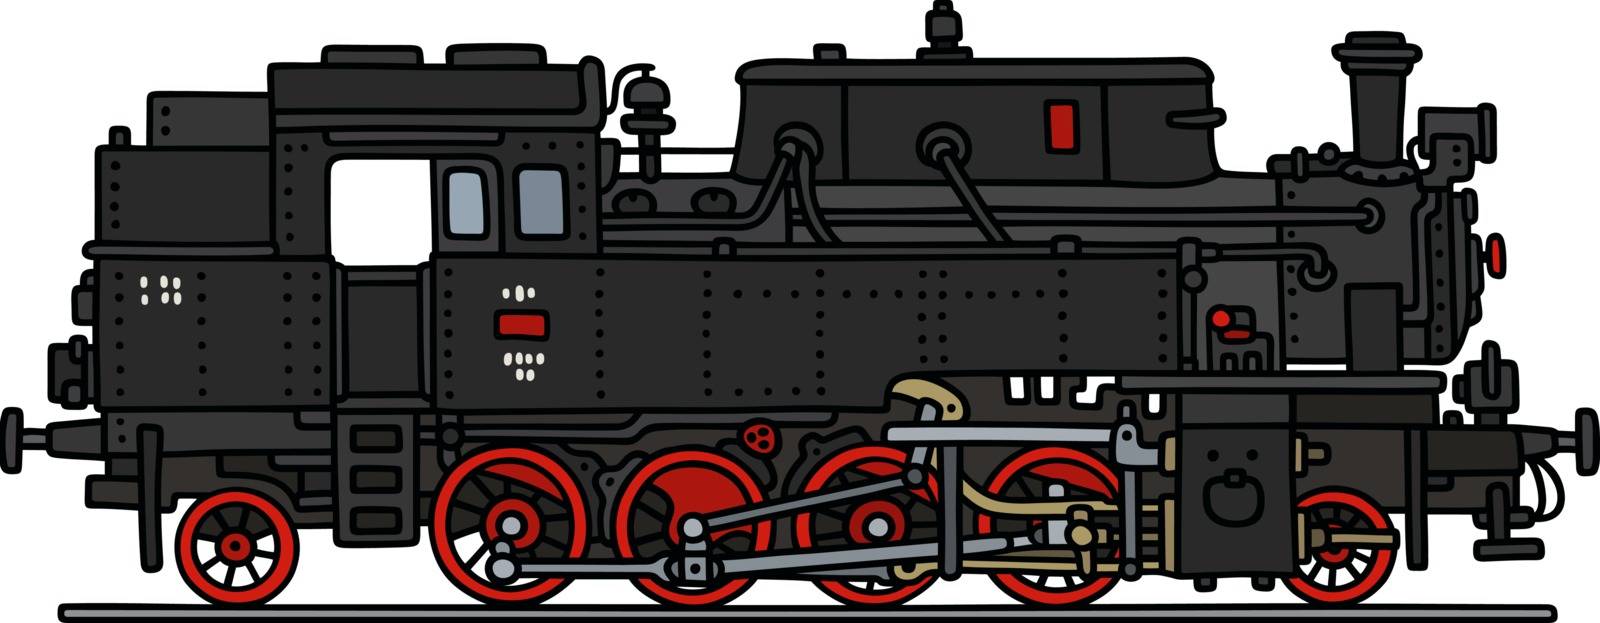 The vectorized hand drawing of a classic steam locomotive